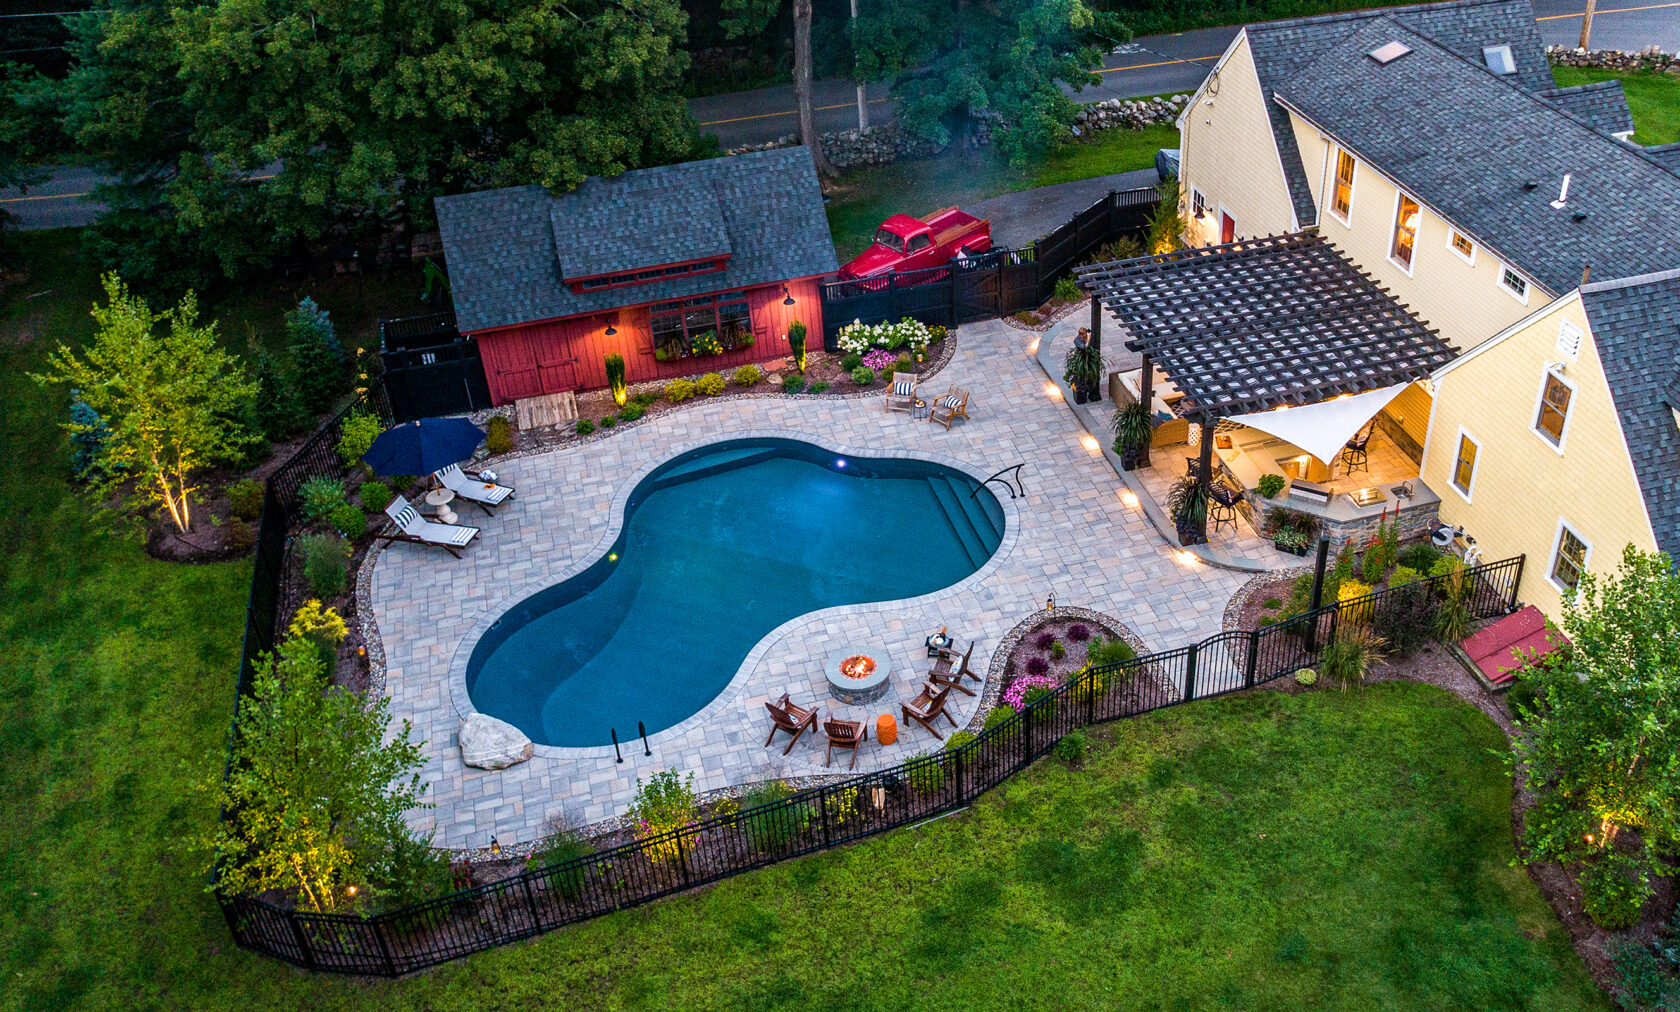 Drone view of pool deck, fire pit, and outdoor kitchen at Dex by Terra's residential landscape design project in Stow, MA.